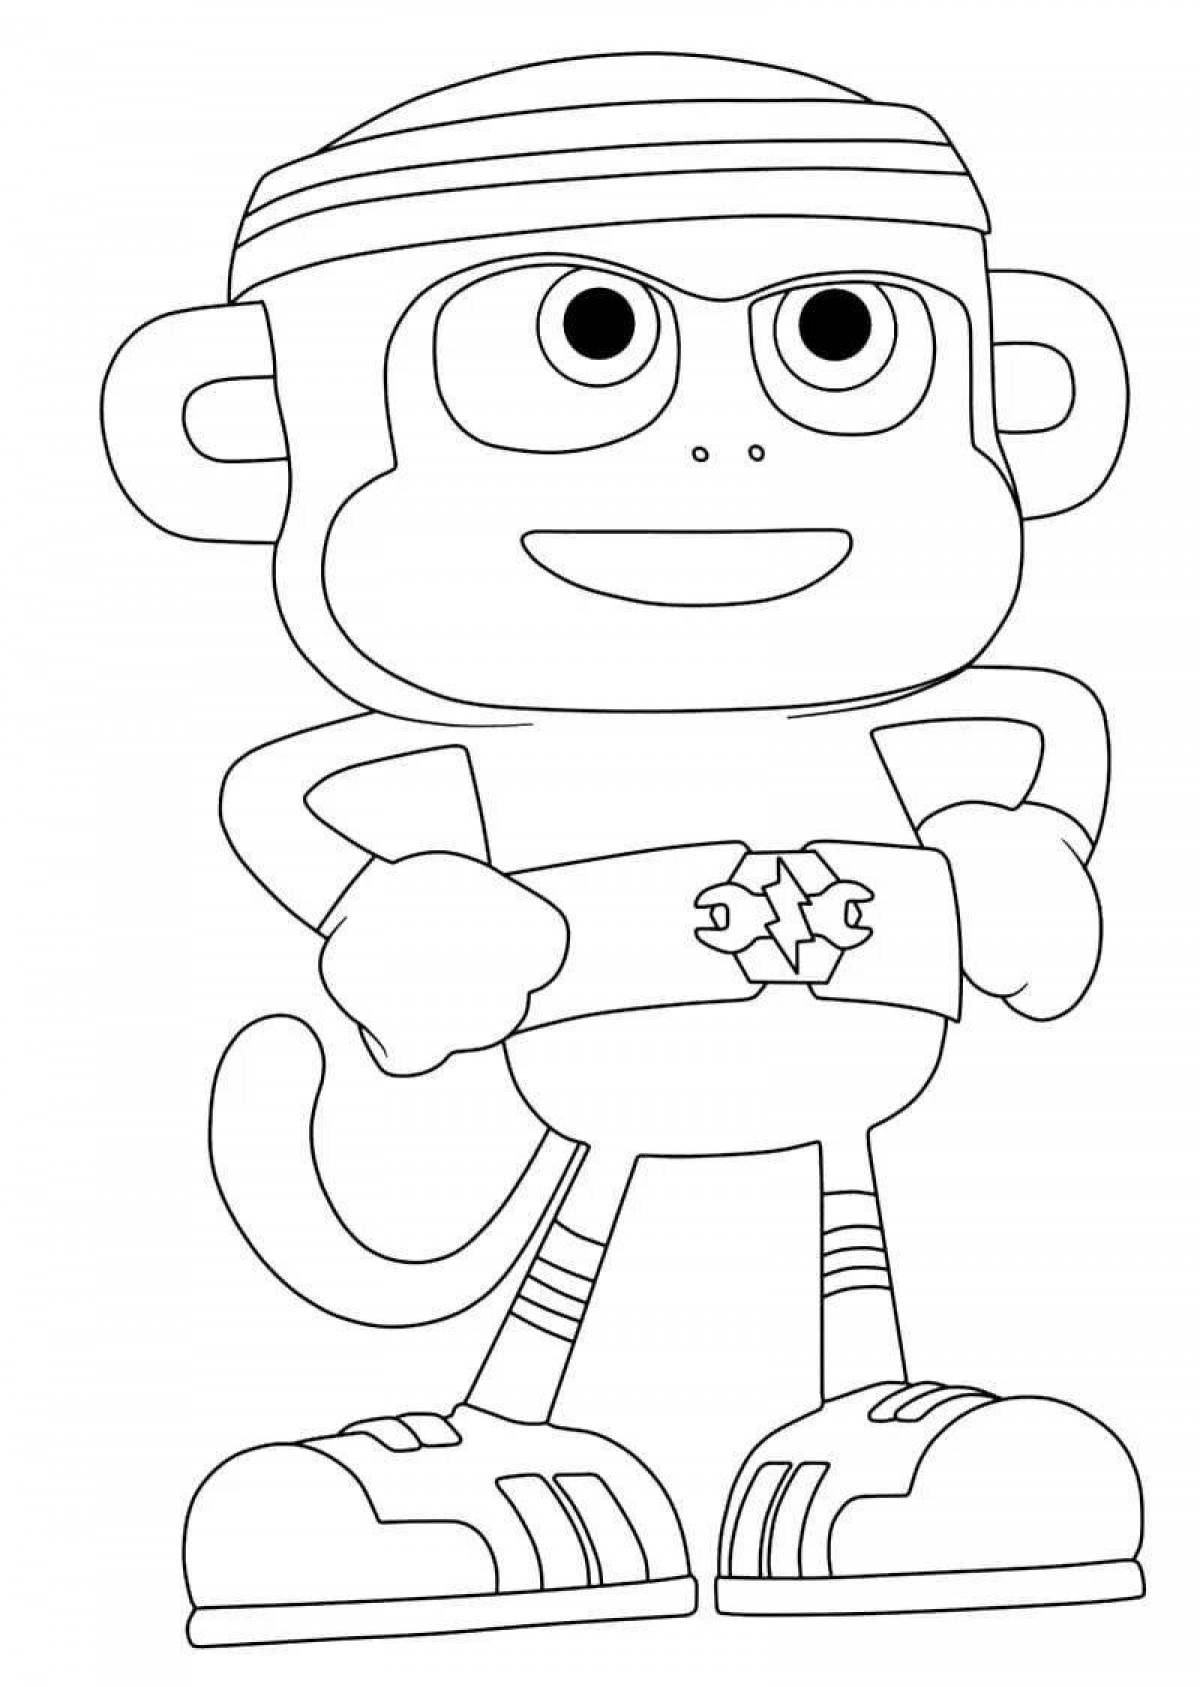 Animated chico coloring book